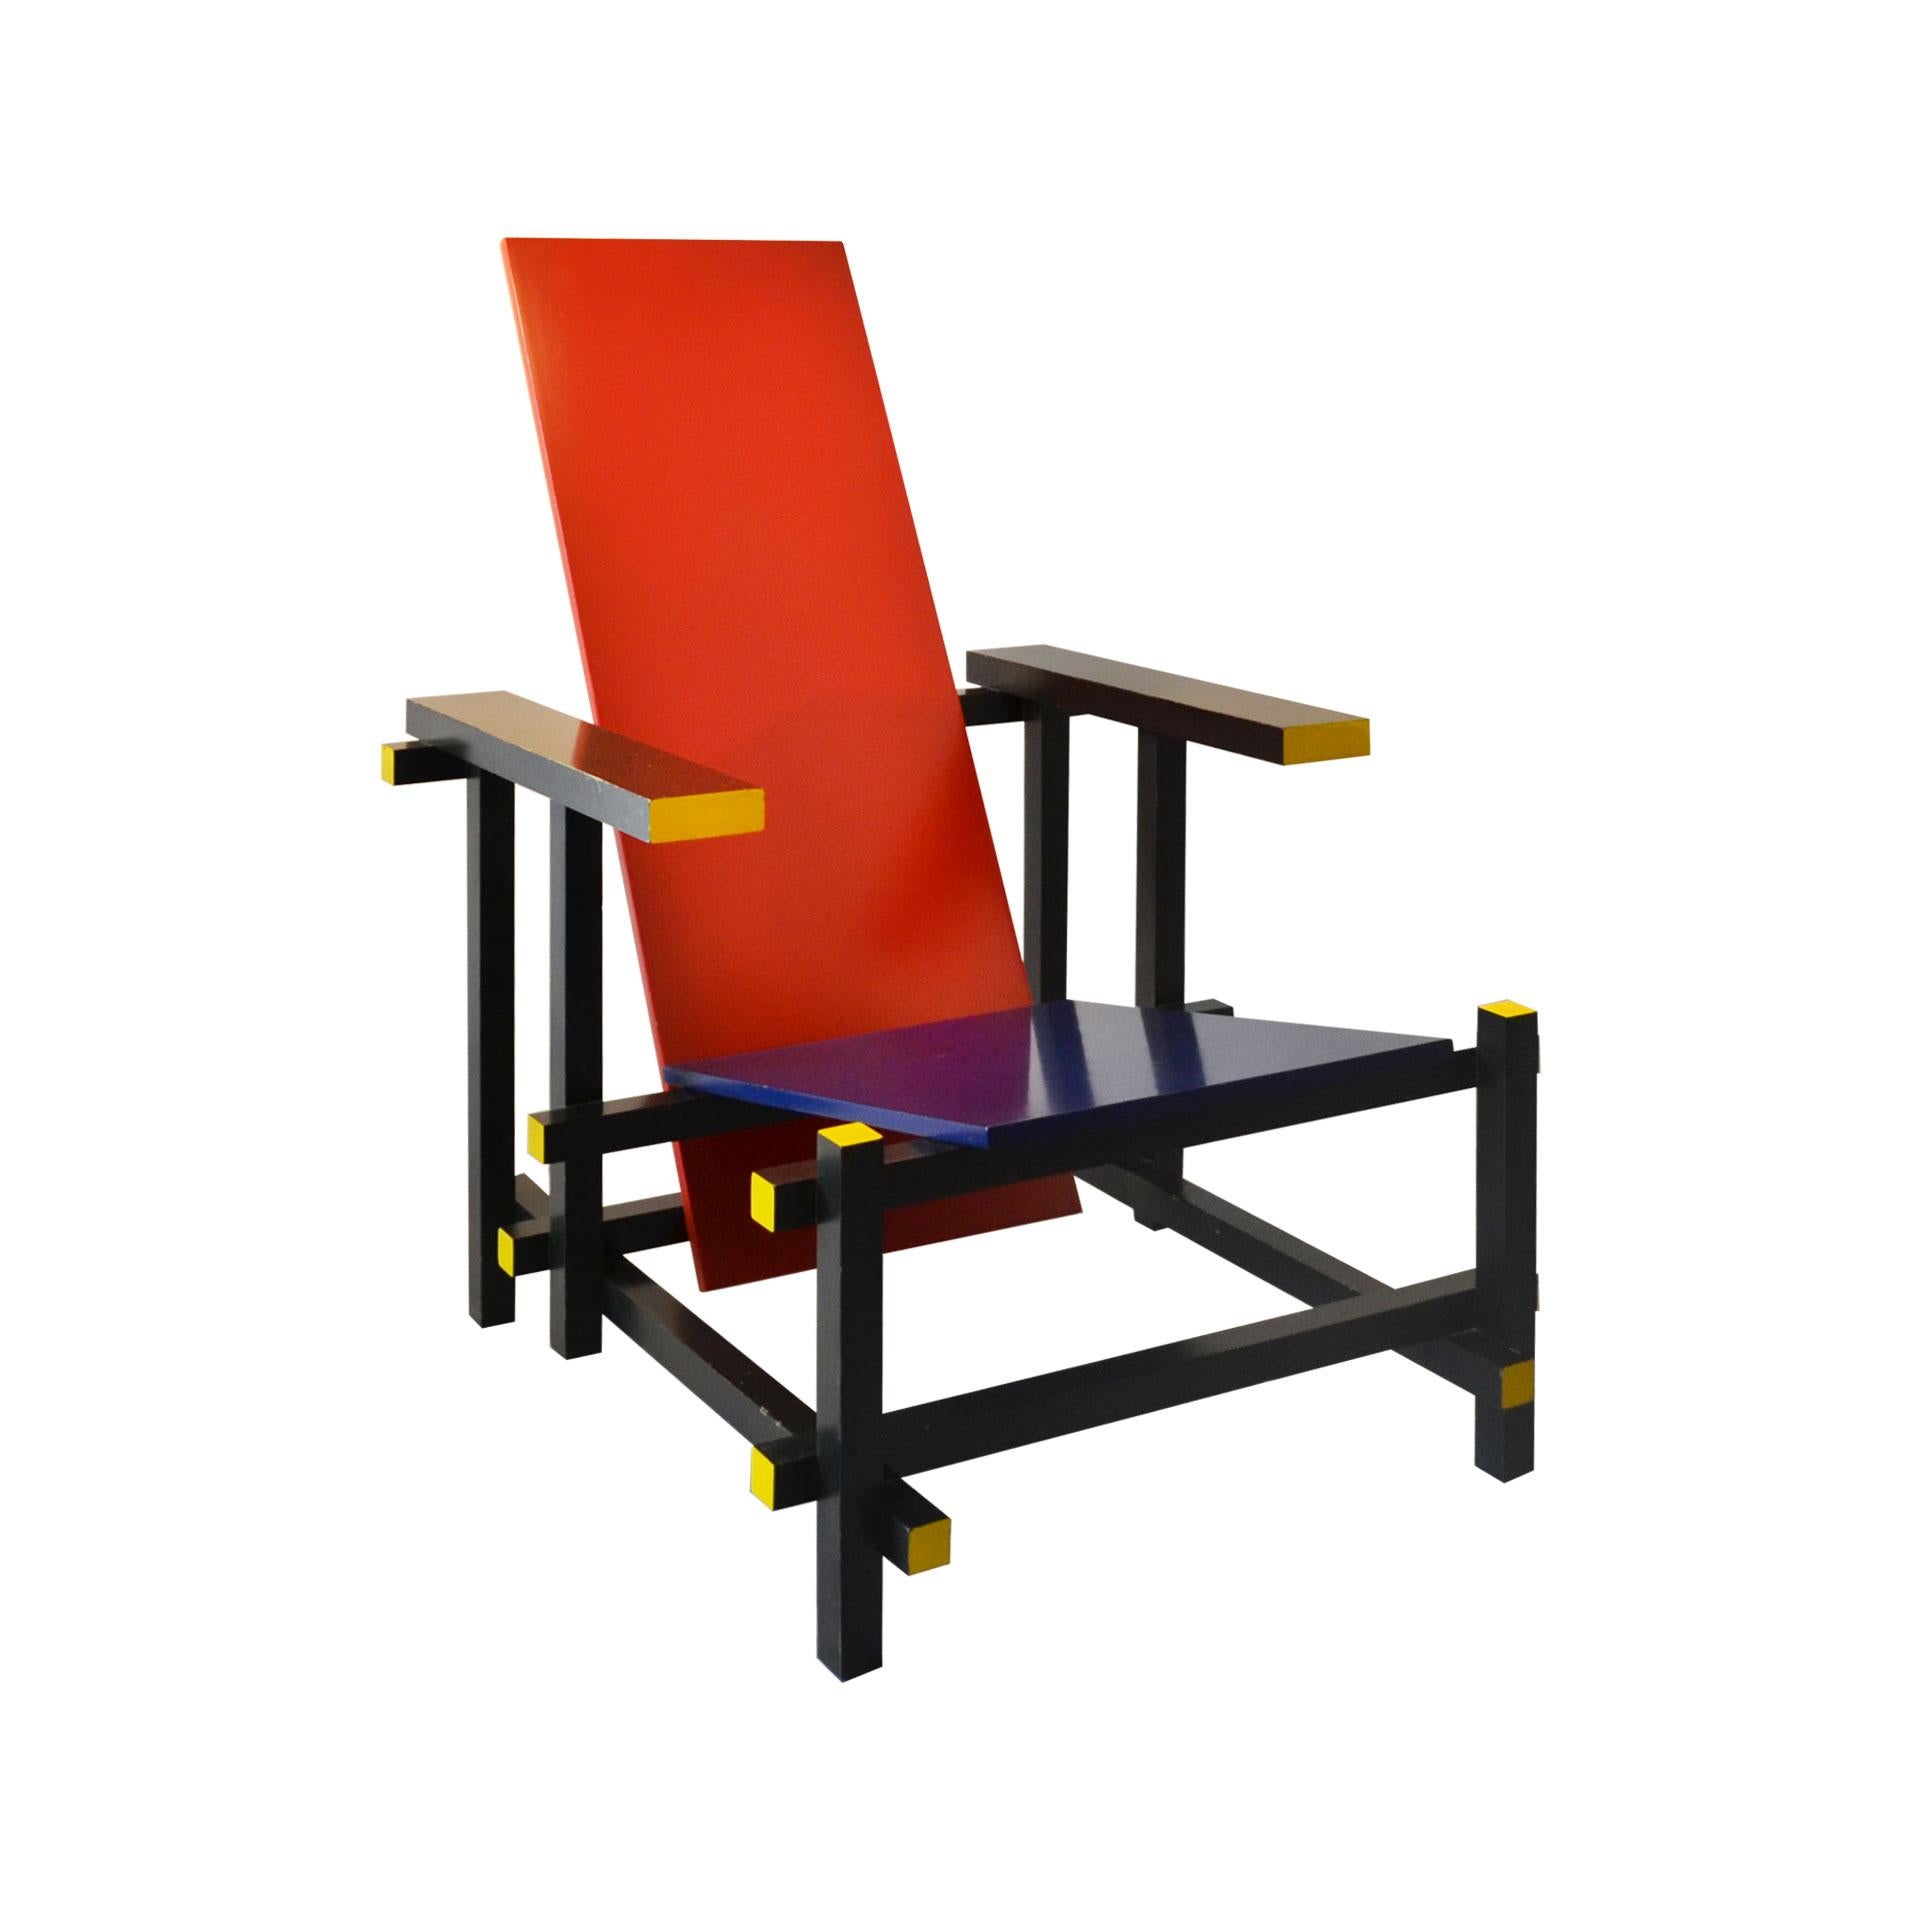 A chair-sculpture with a pure and rational form. An authentic manifesto of the objective approach of Neoplasticism, promoted by the Dutch movement De Stijl in 1917. A poetics also encouraged by Piet Mondrian, whose goal was the search for the